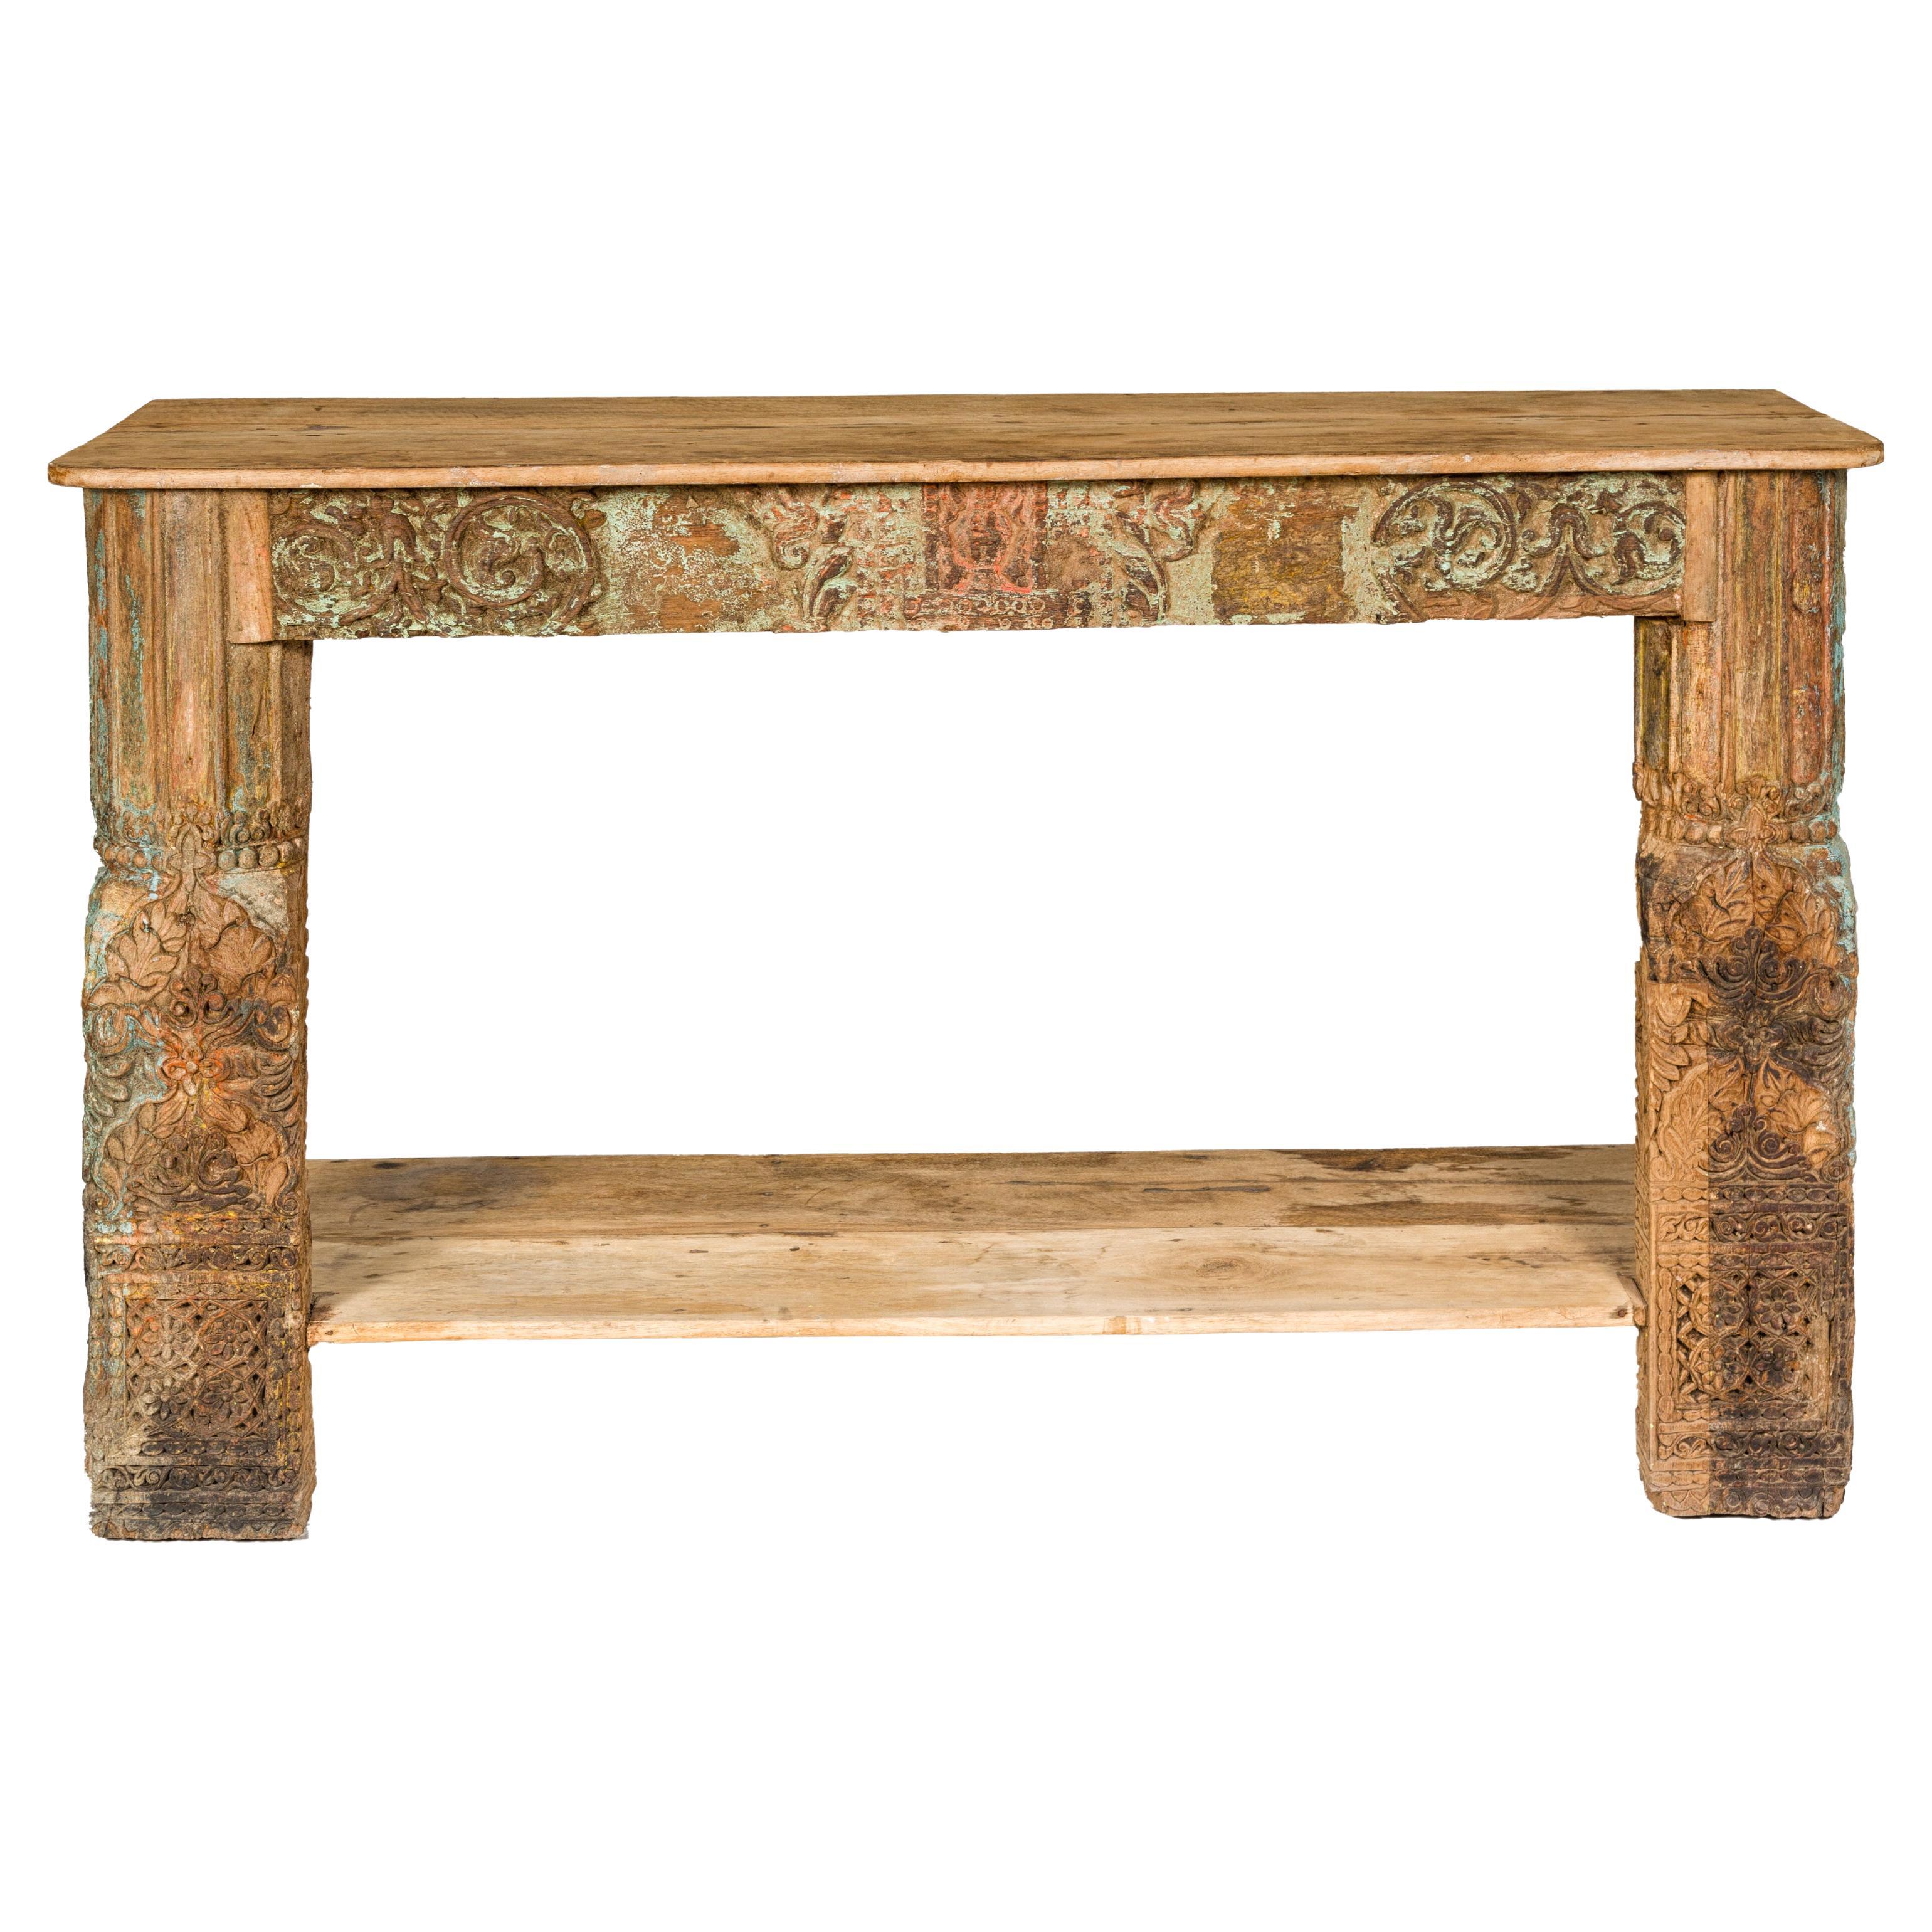 Mughal Style Distressed Polychrome Console Table with Carved Apron with Shelf For Sale